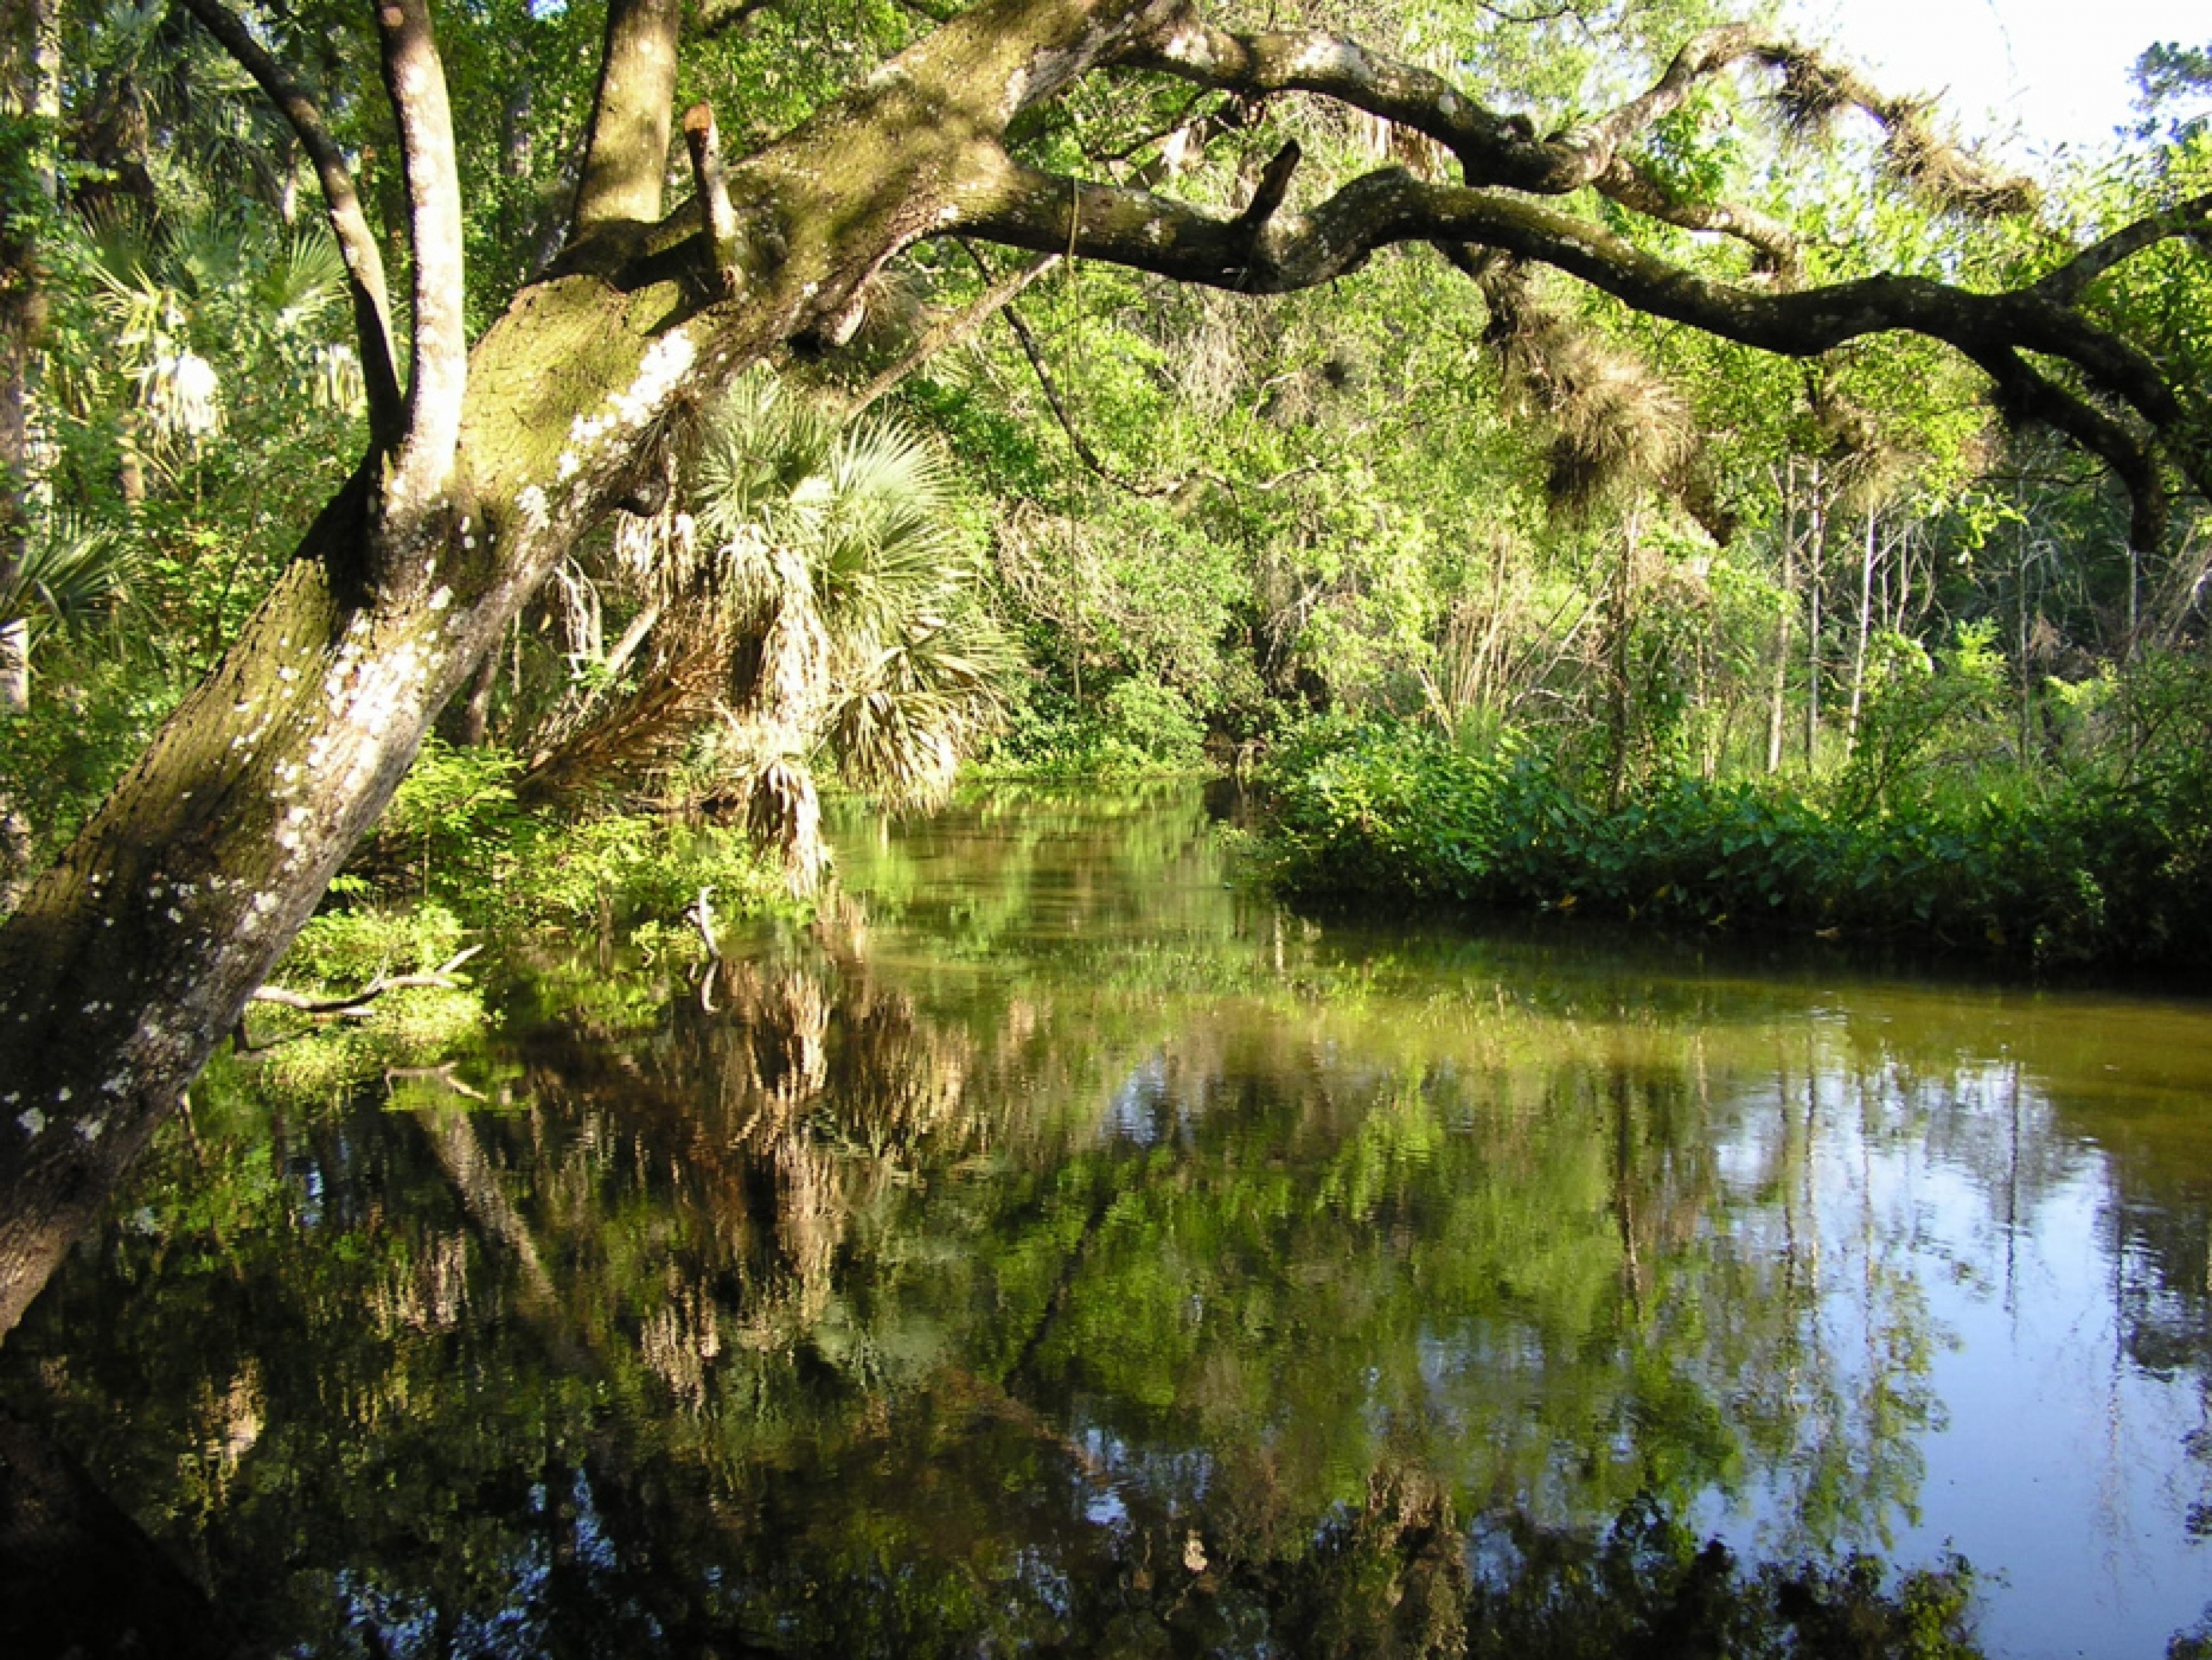 Trees hanging over the green-lined Wekiva Wild and Scenic River